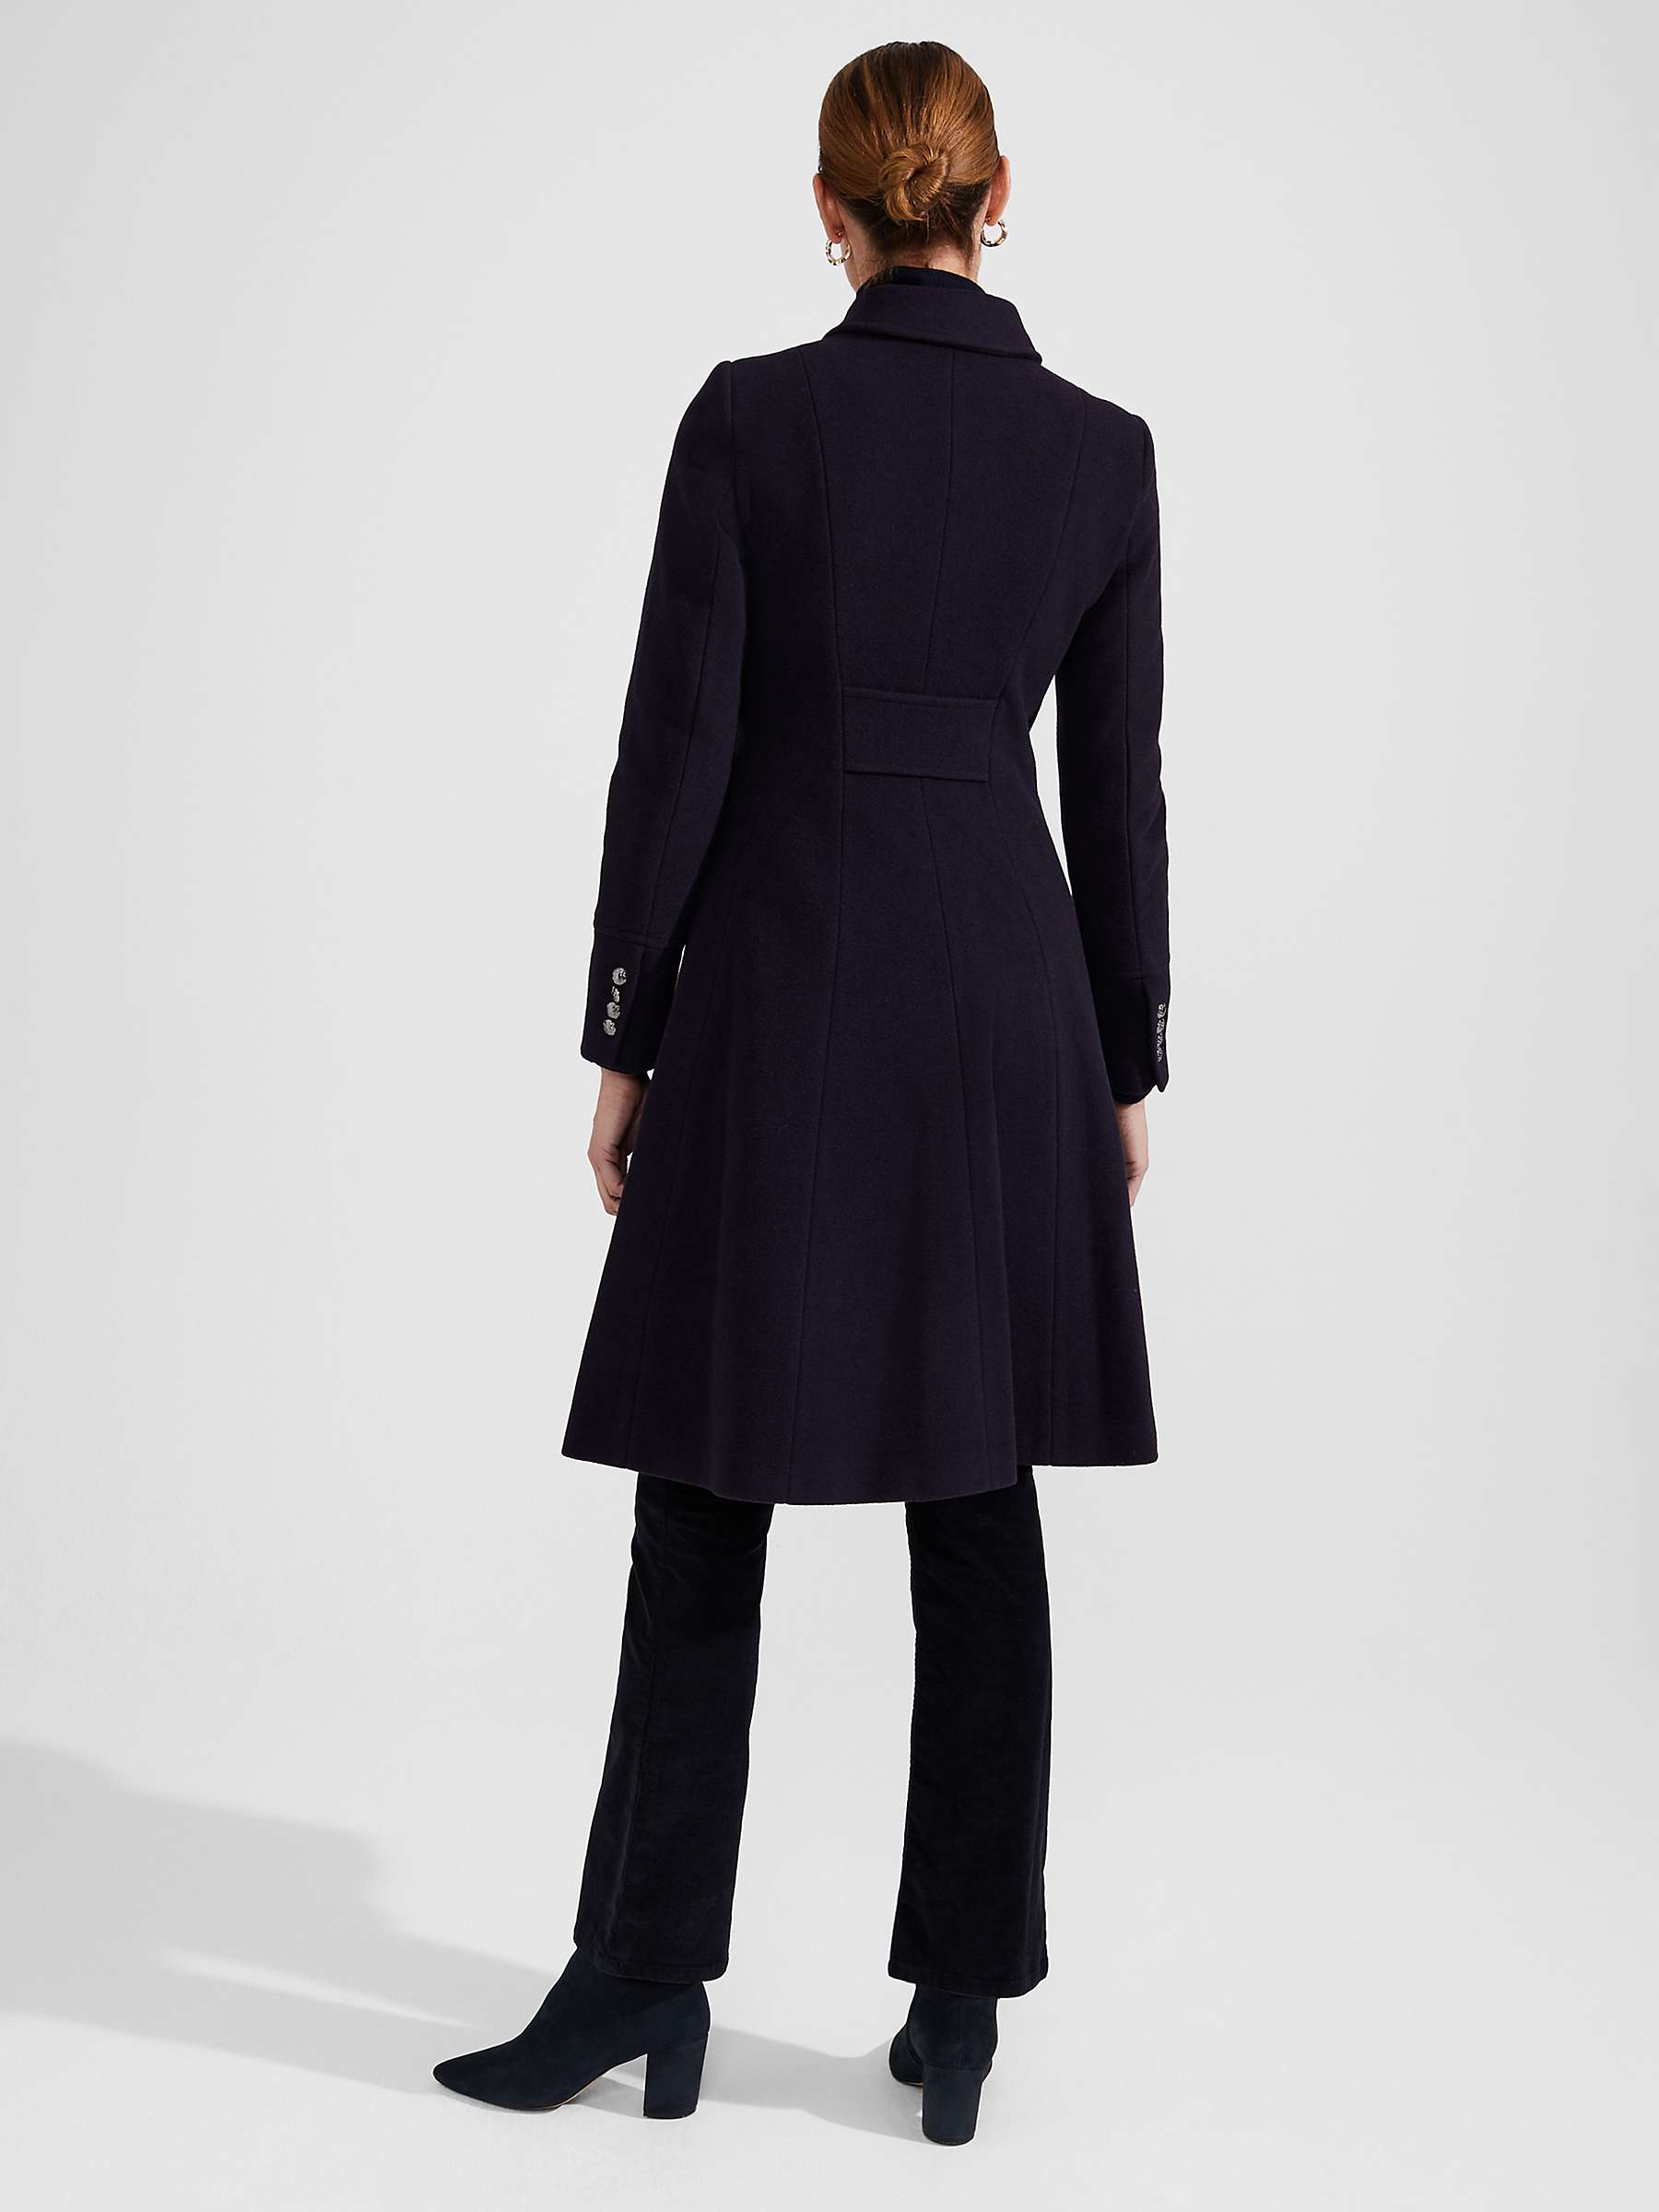 Hobbs Clarisse Wool and Cashmere Blend Coat, Navy at John Lewis & Partners